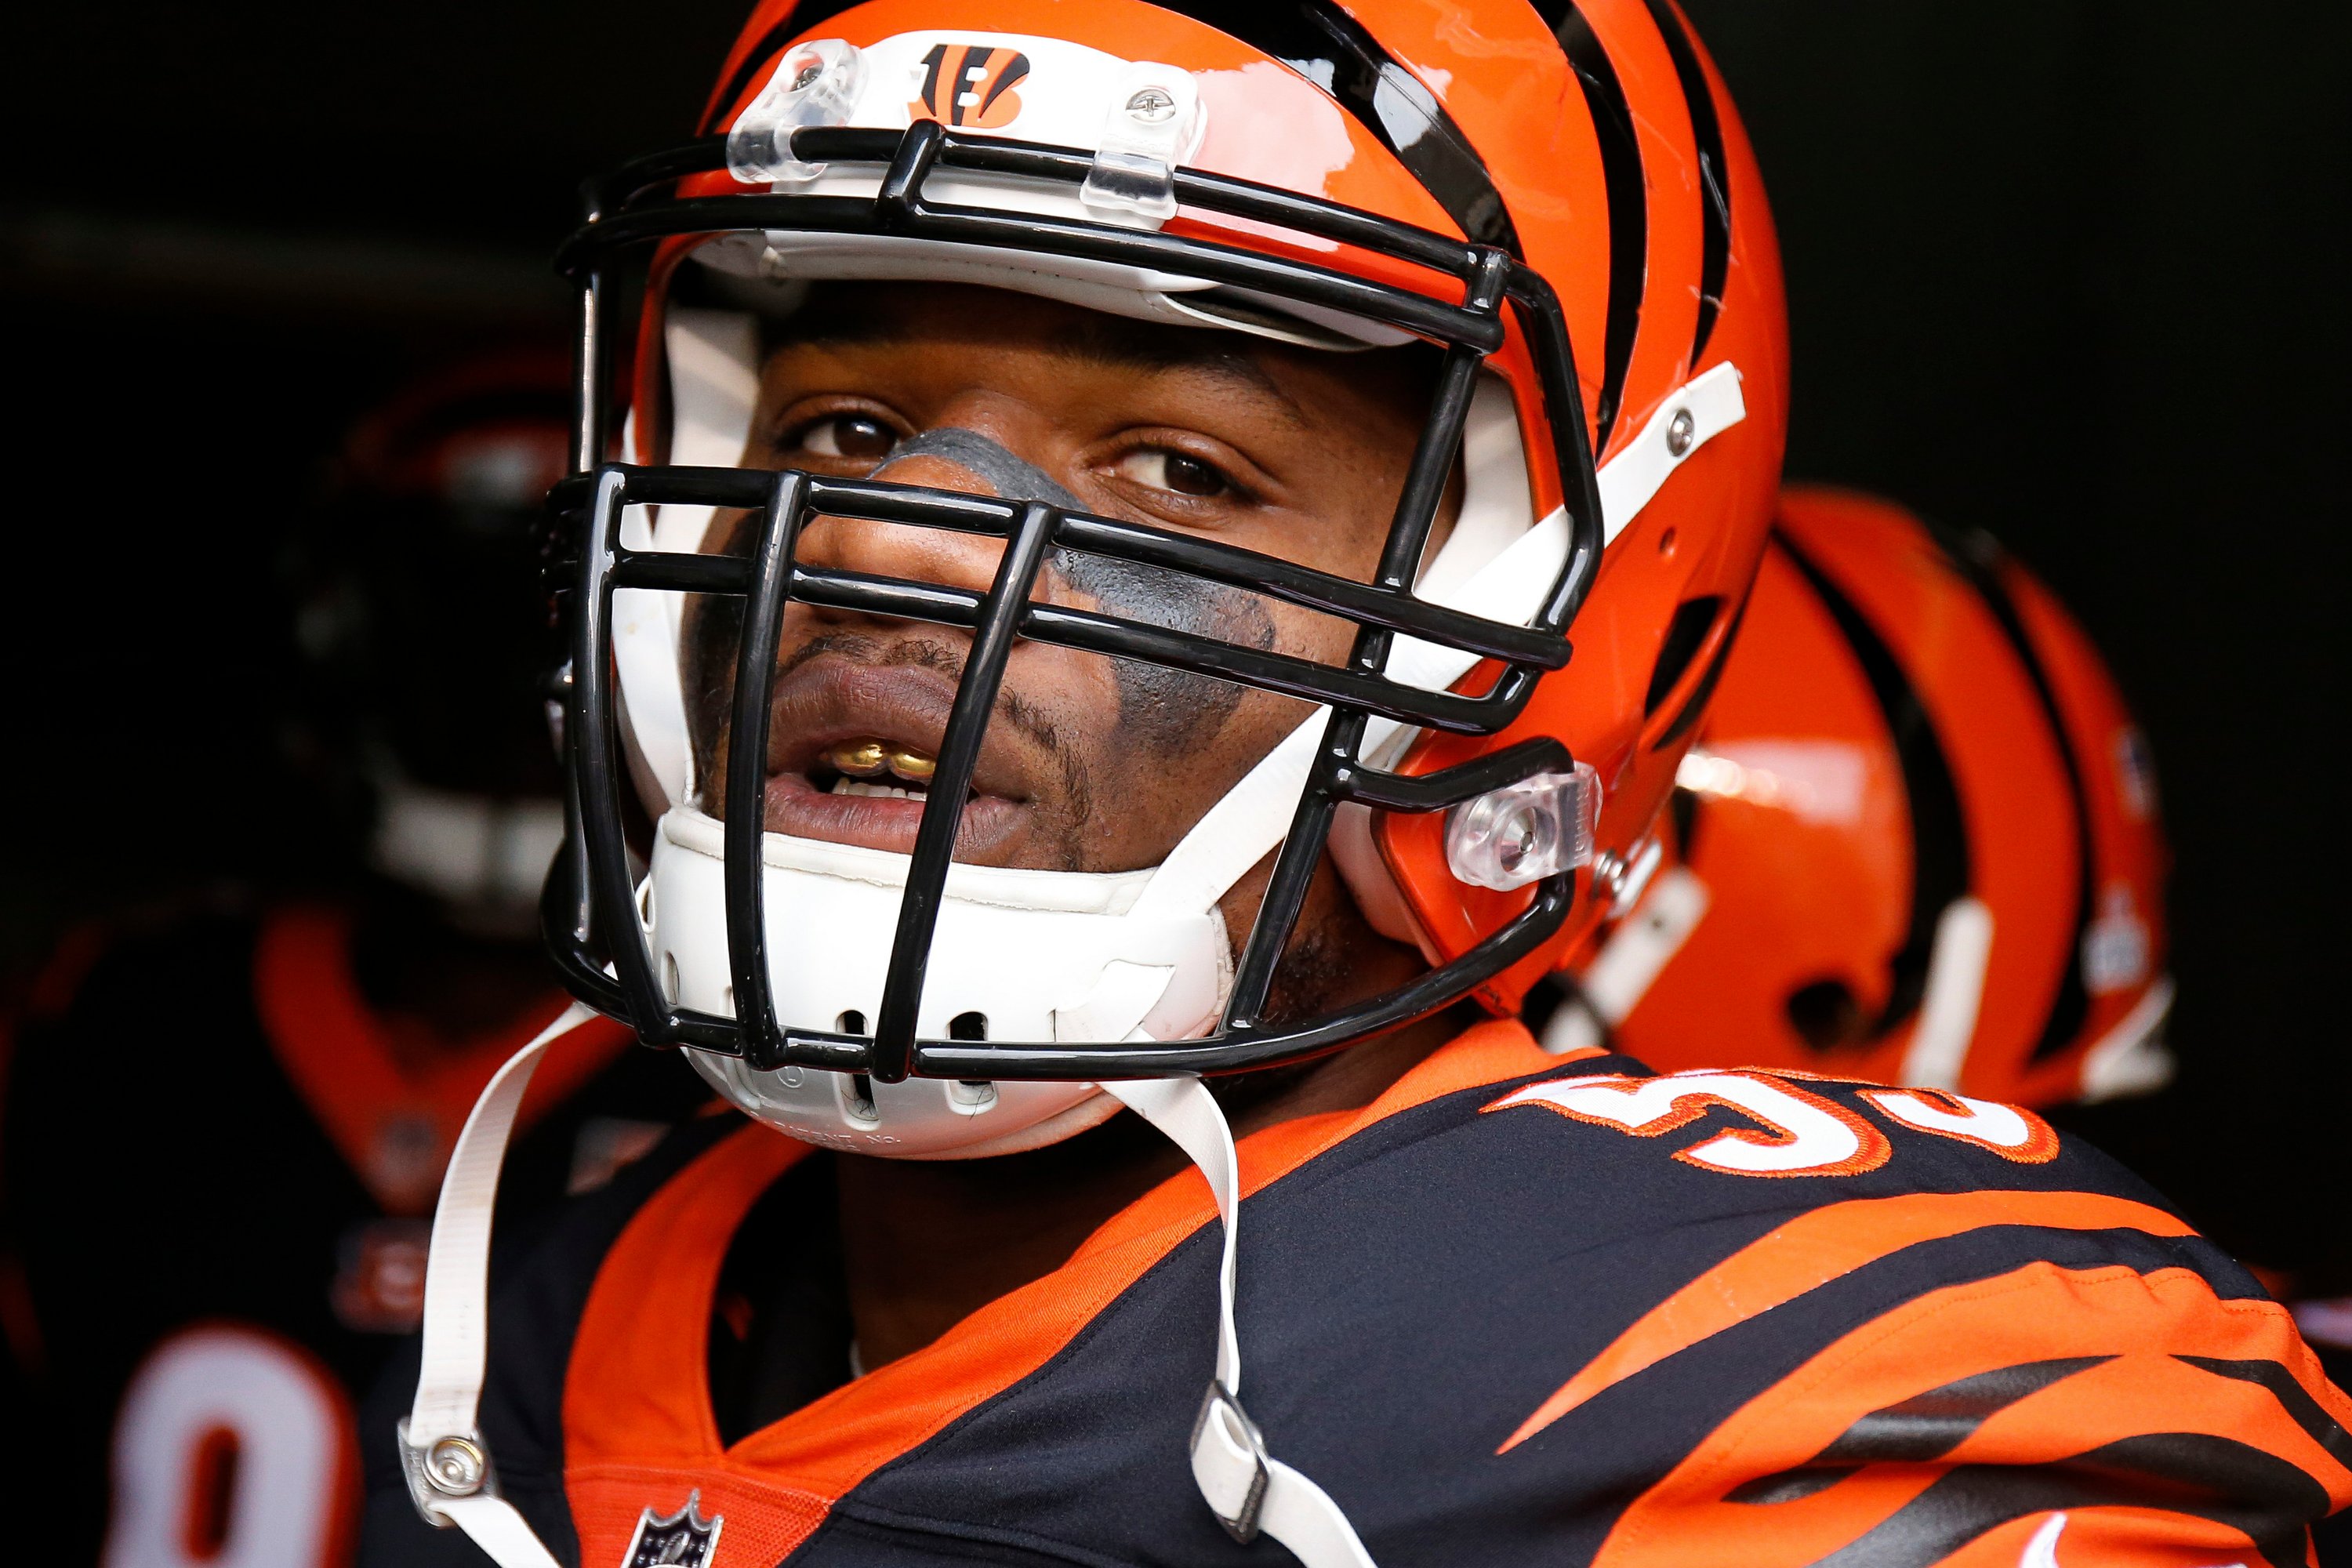 NFL rejects Burfict's appeal, upholds 4game suspension AP News